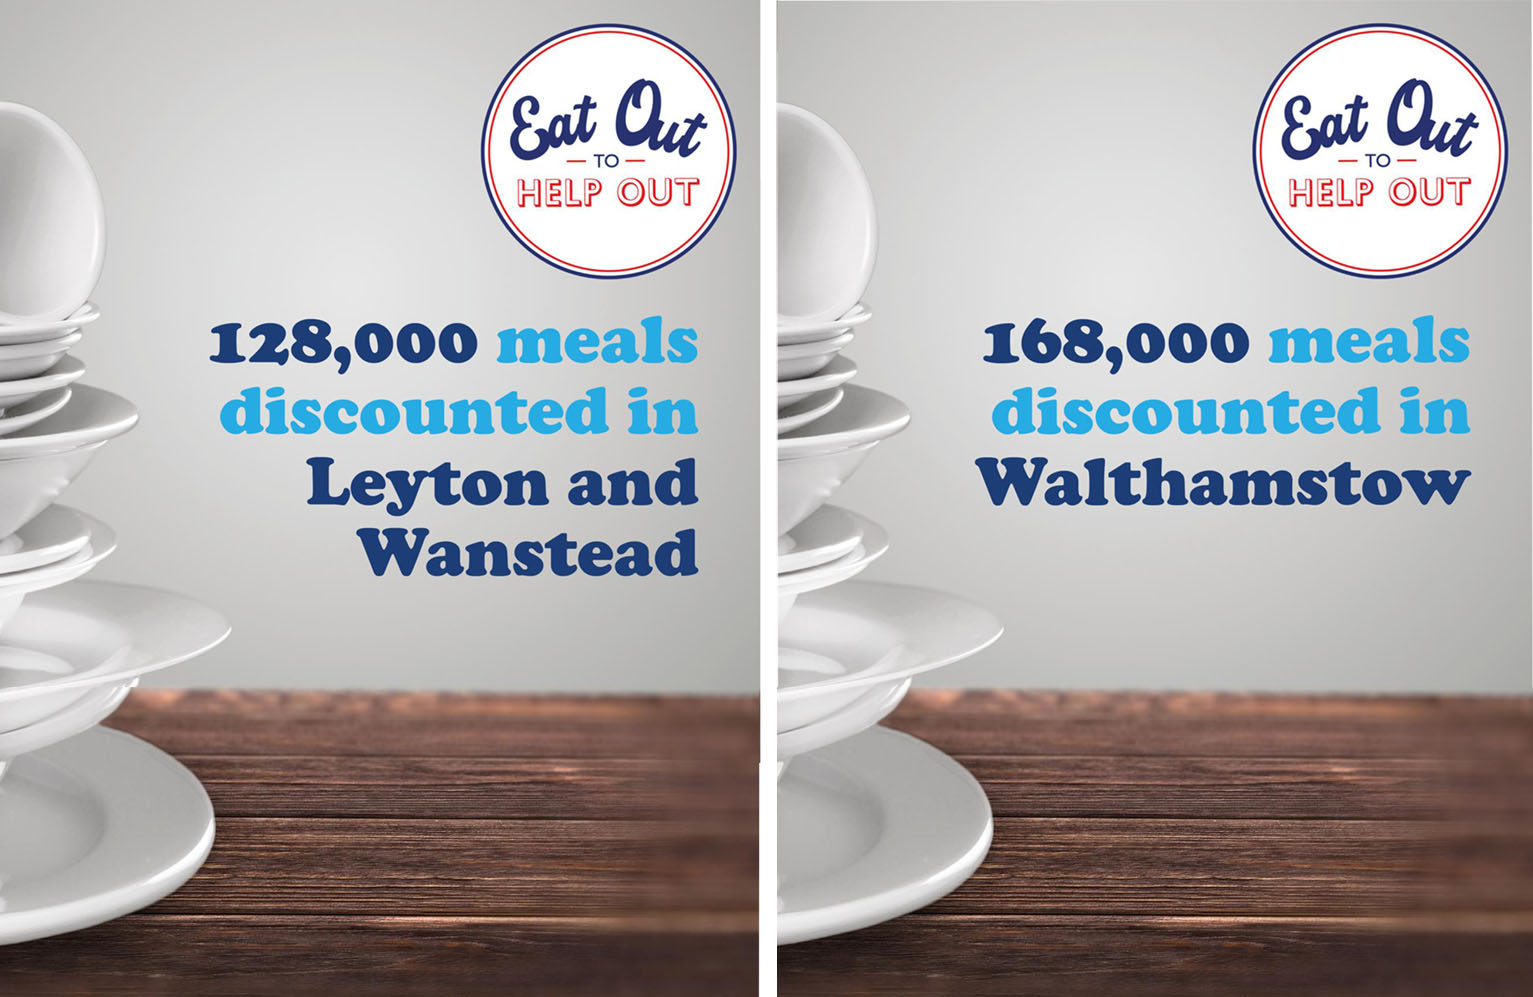 eat out to help out walthamstow, Leyton and Wanstead